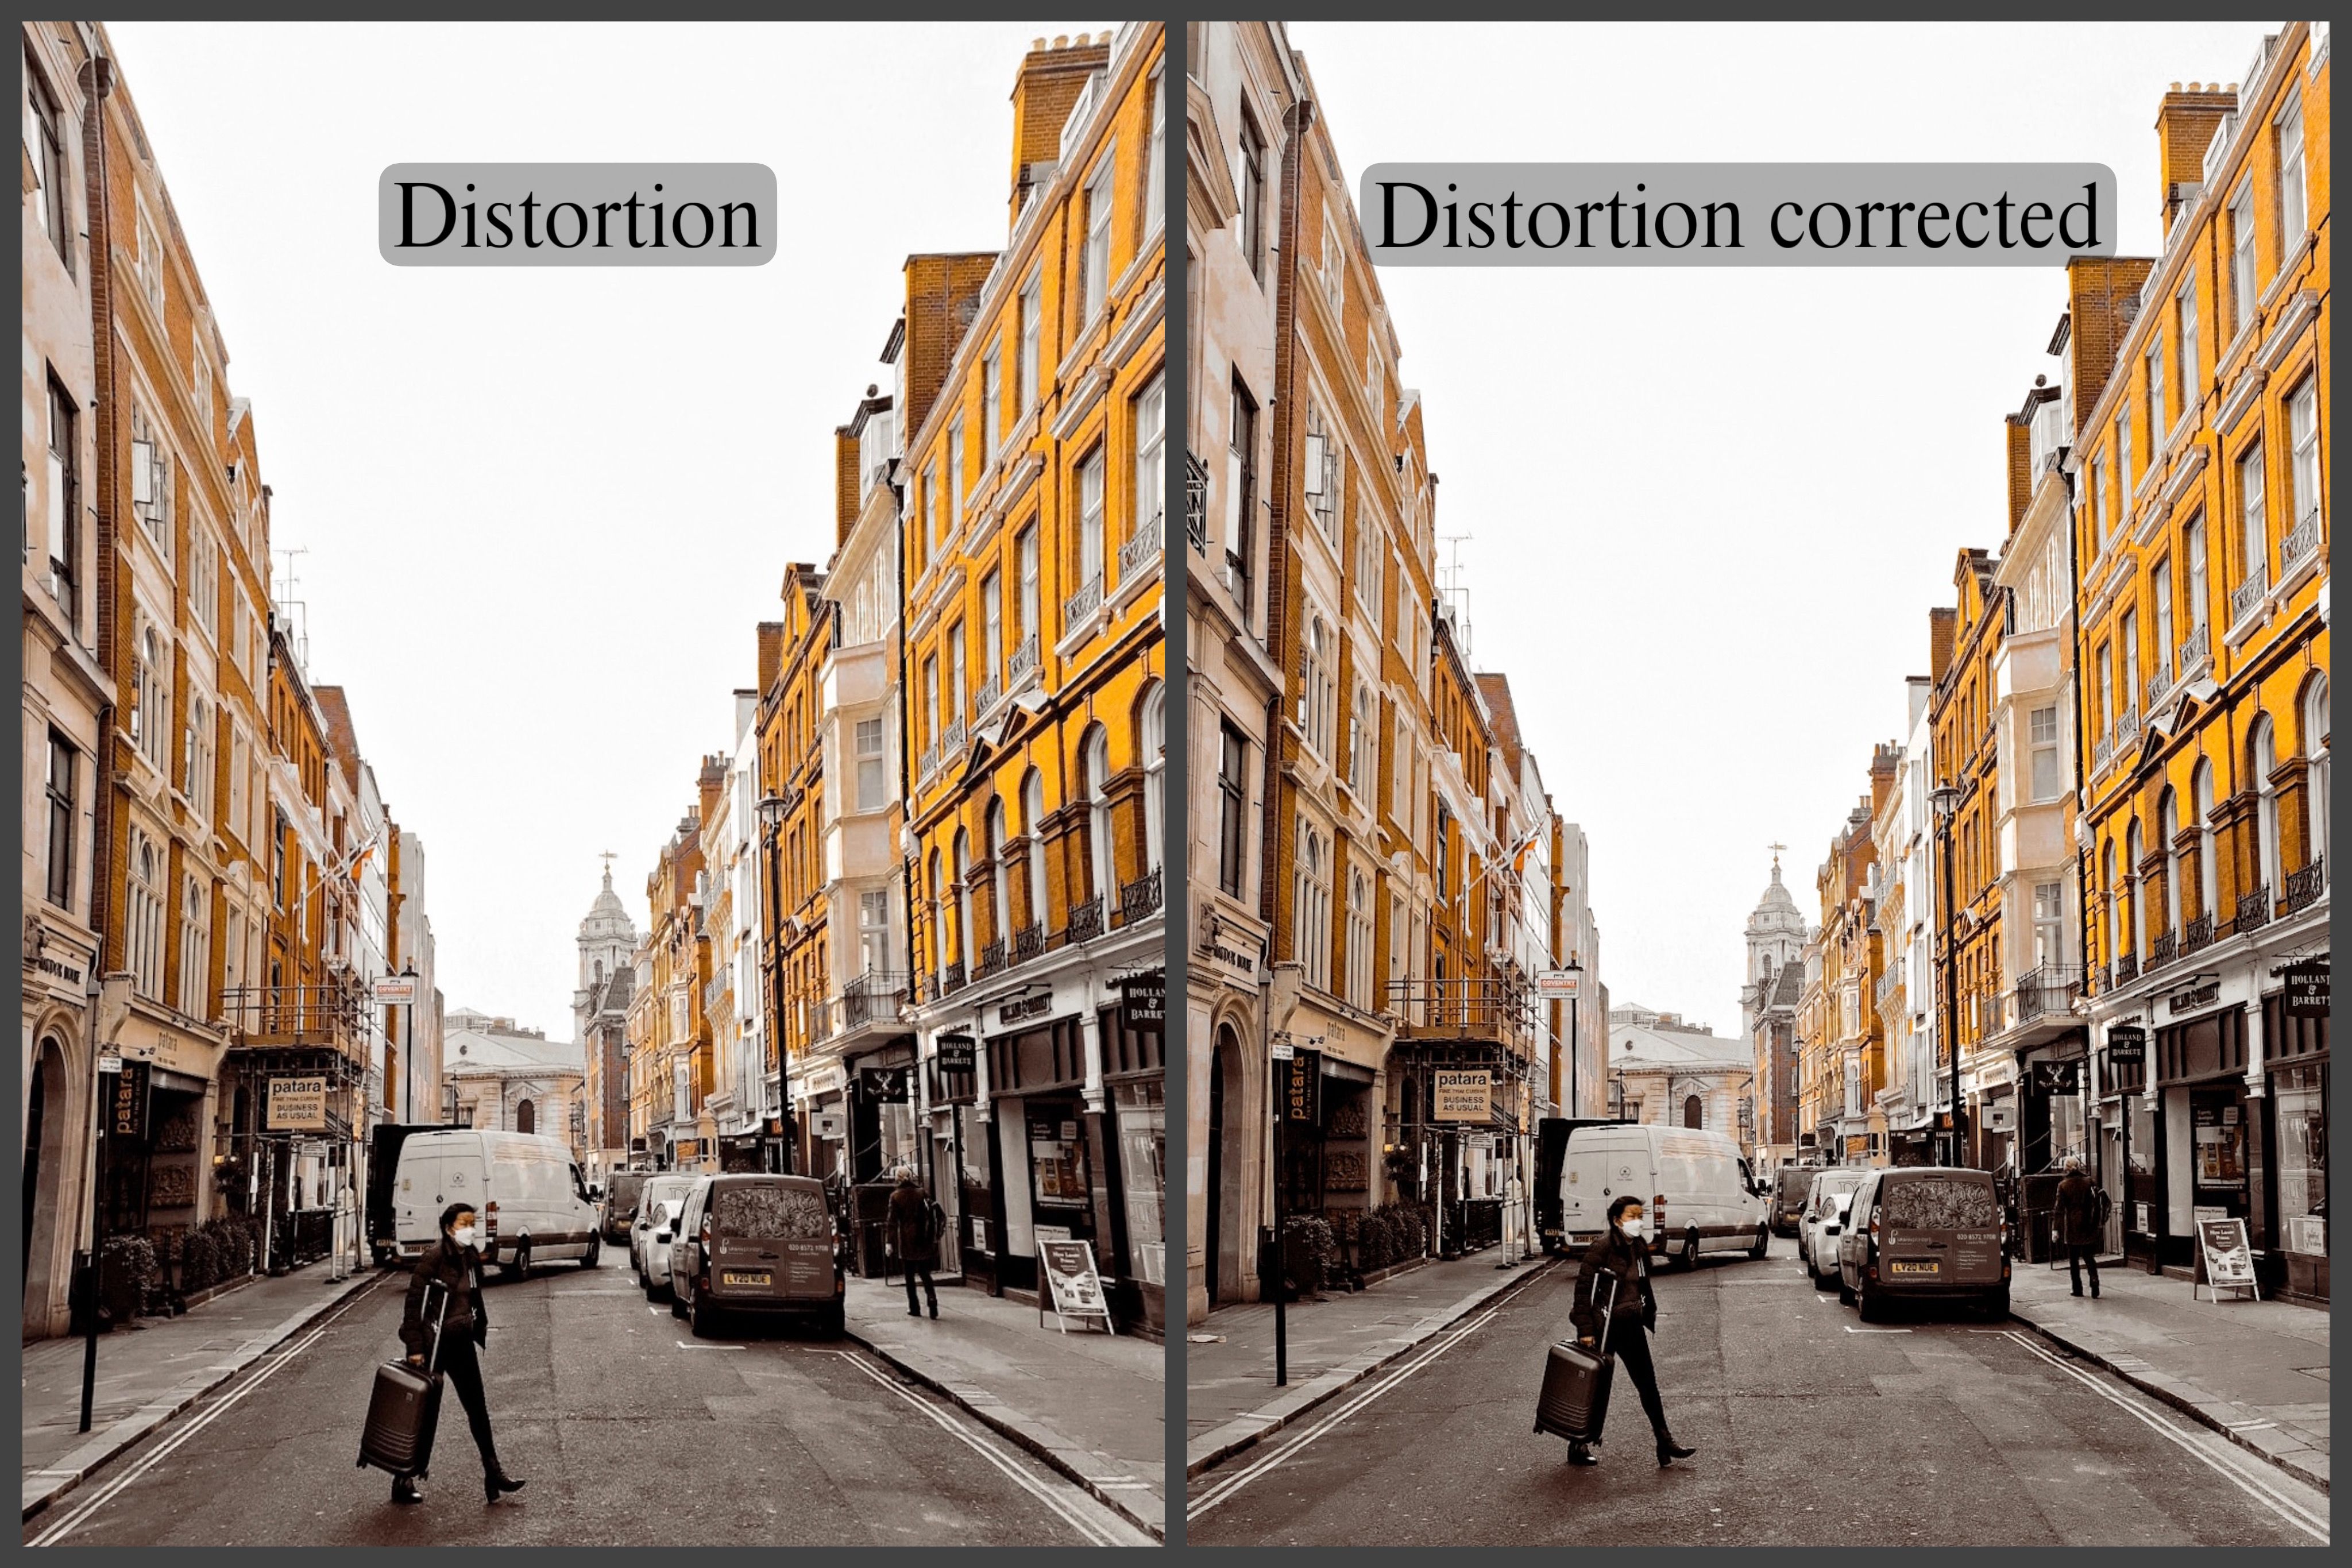 Before and after distortion of street buildings in London